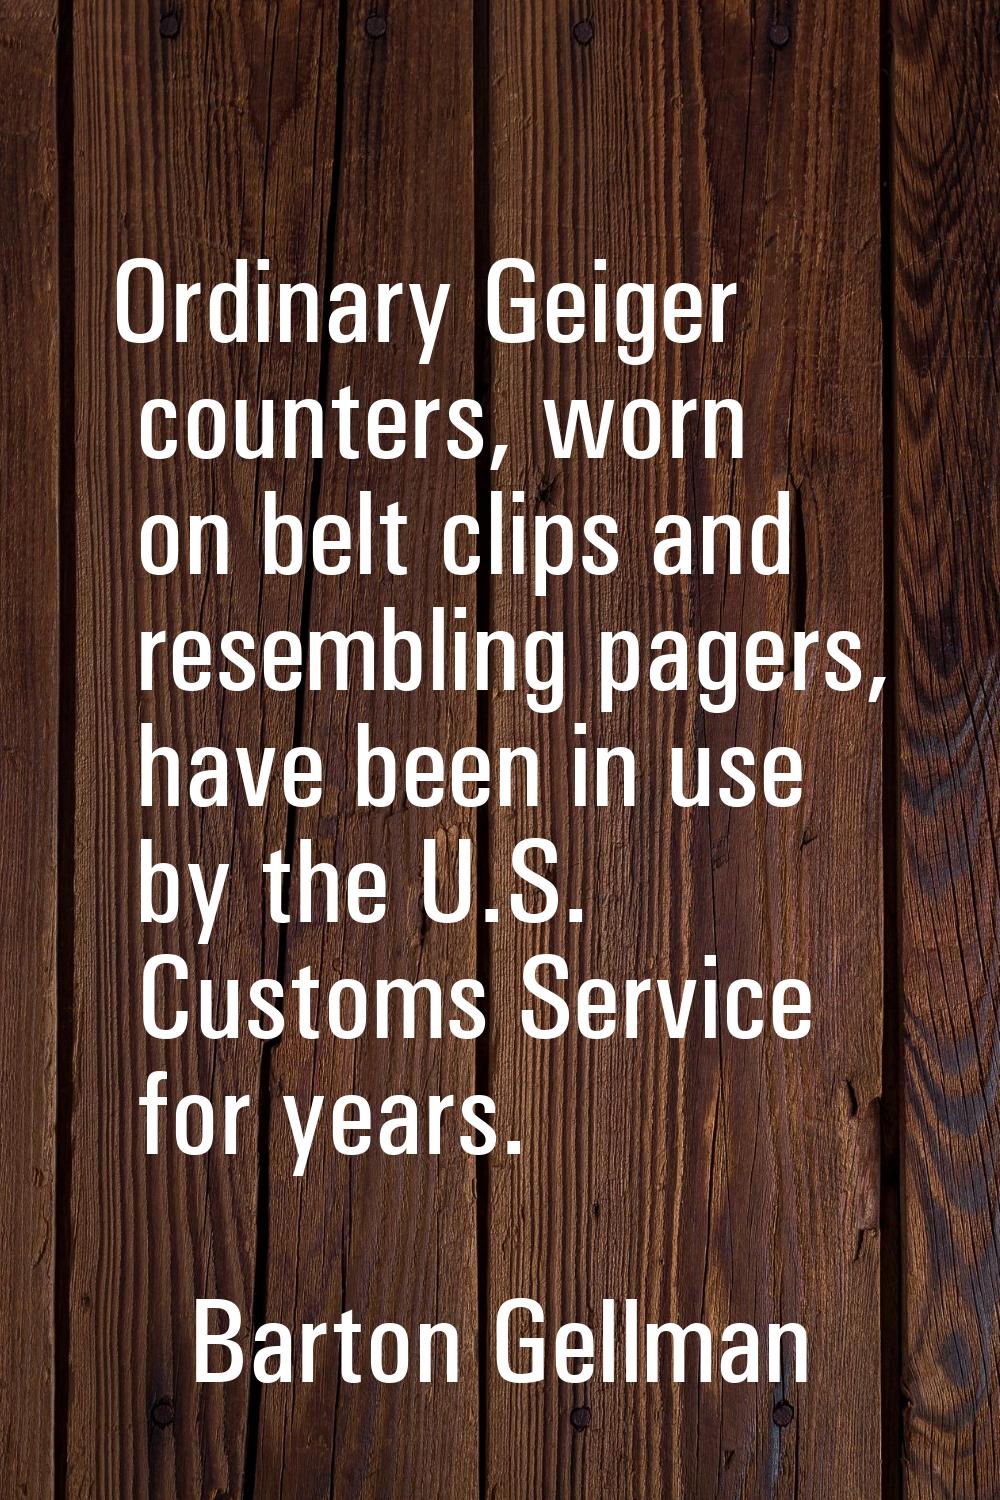 Ordinary Geiger counters, worn on belt clips and resembling pagers, have been in use by the U.S. Cu